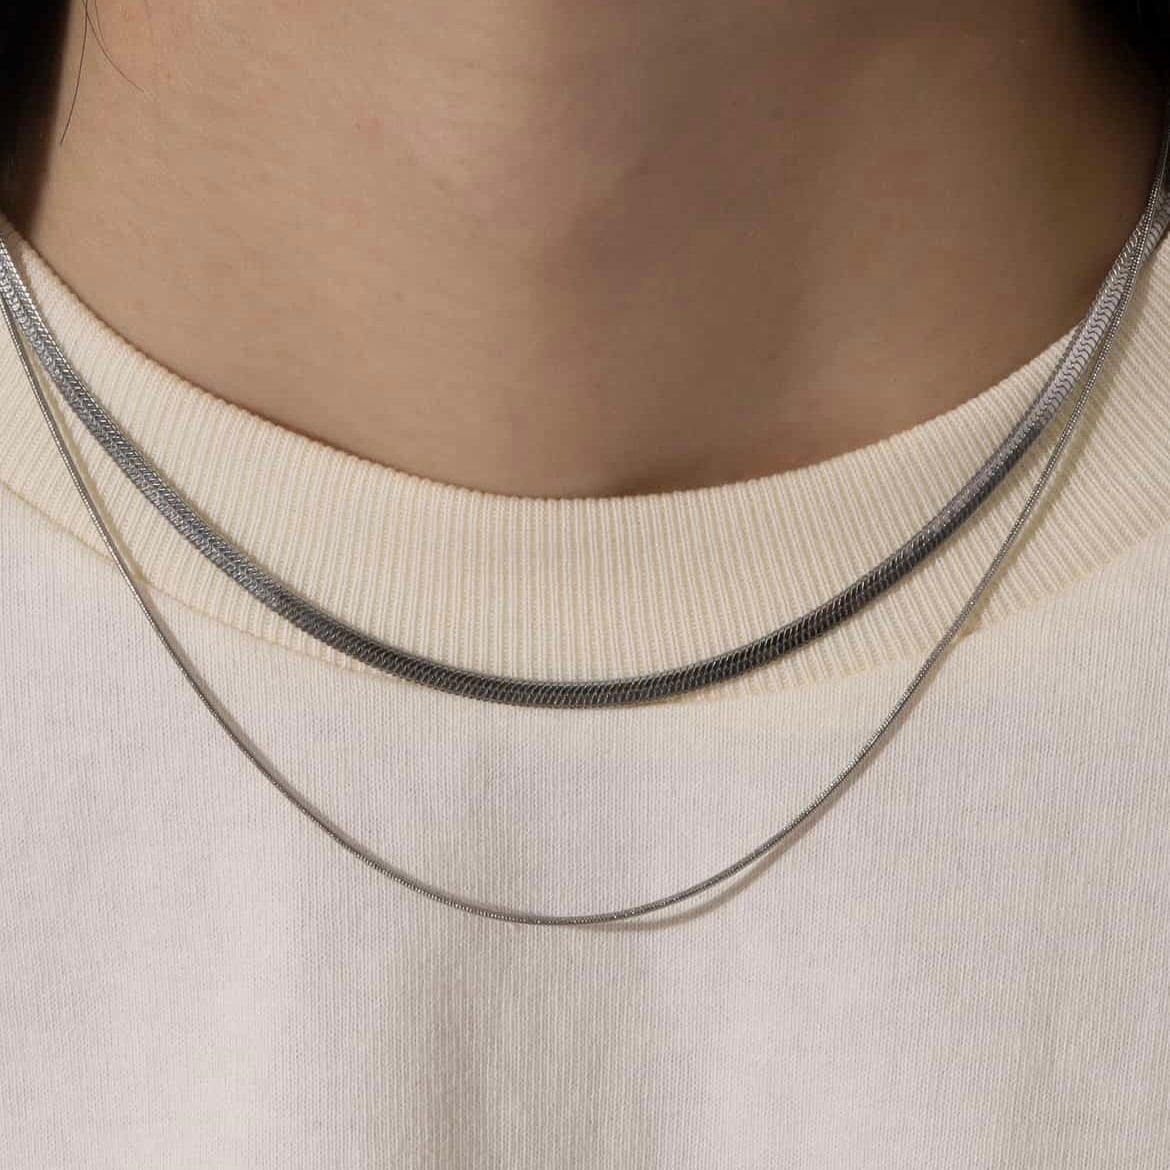 garcia  thin snake necklace (gold)　#n53